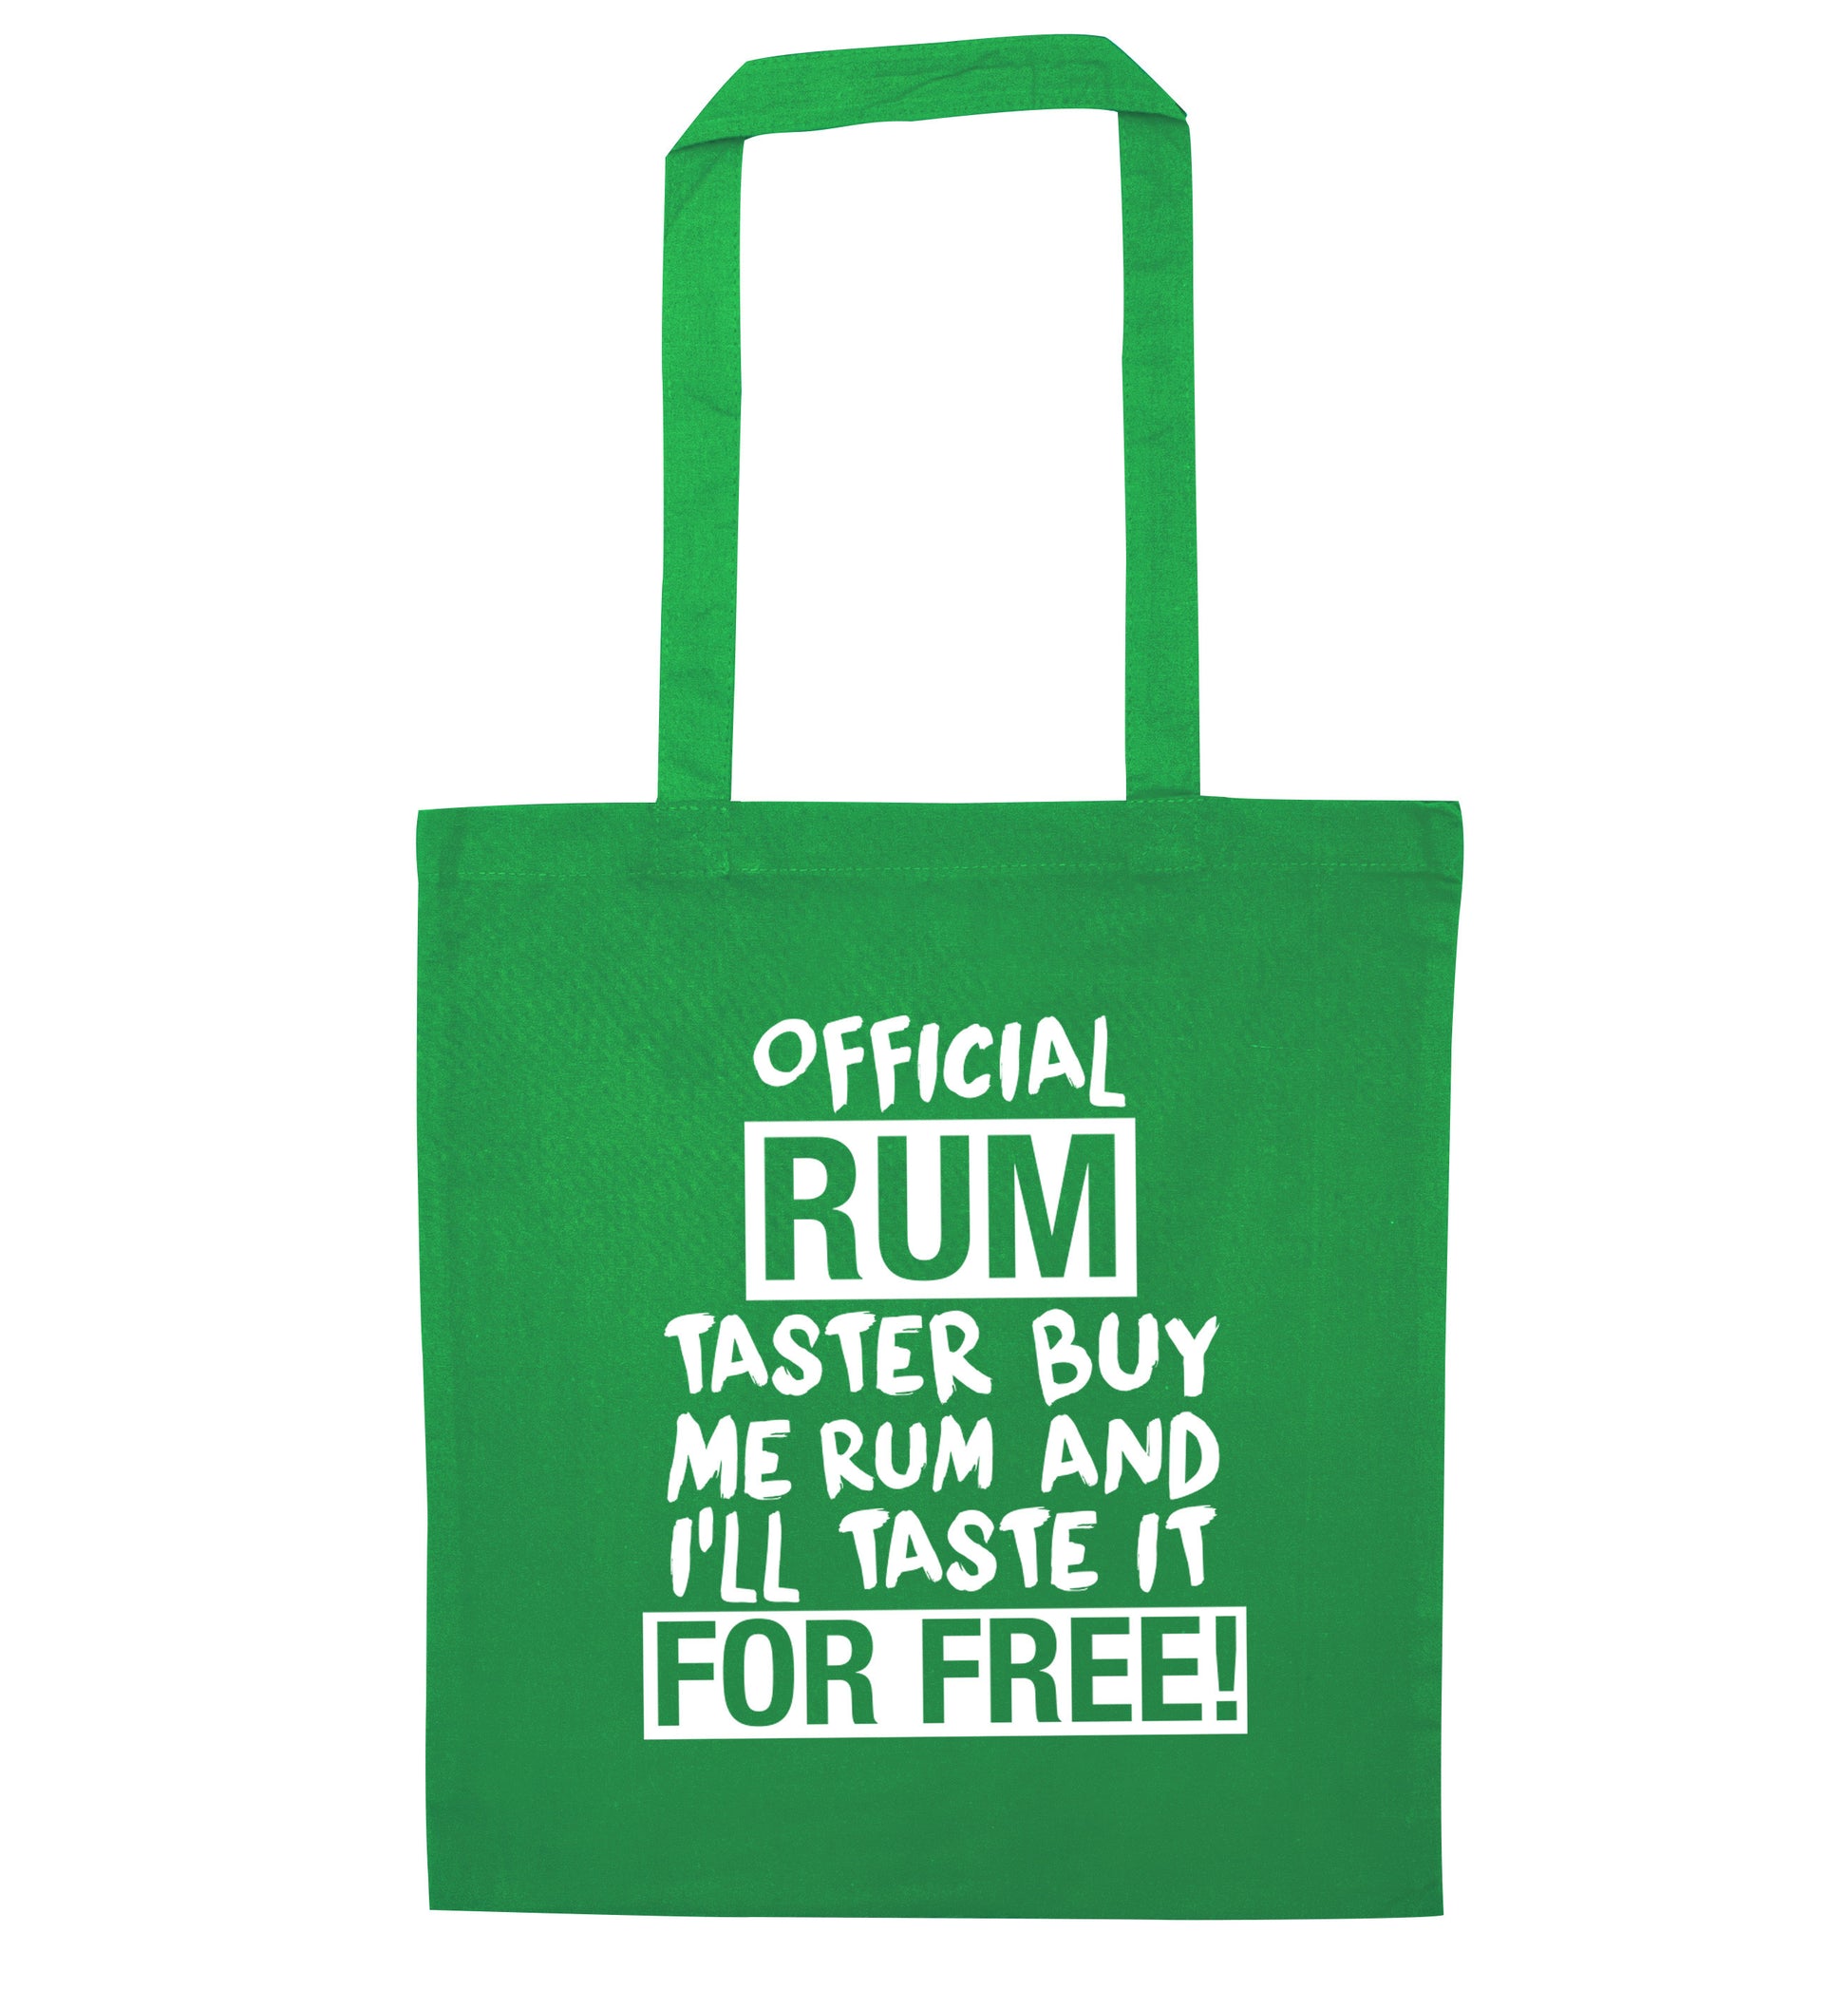 Official rum taster buy me rum and I'll taste it for free green tote bag